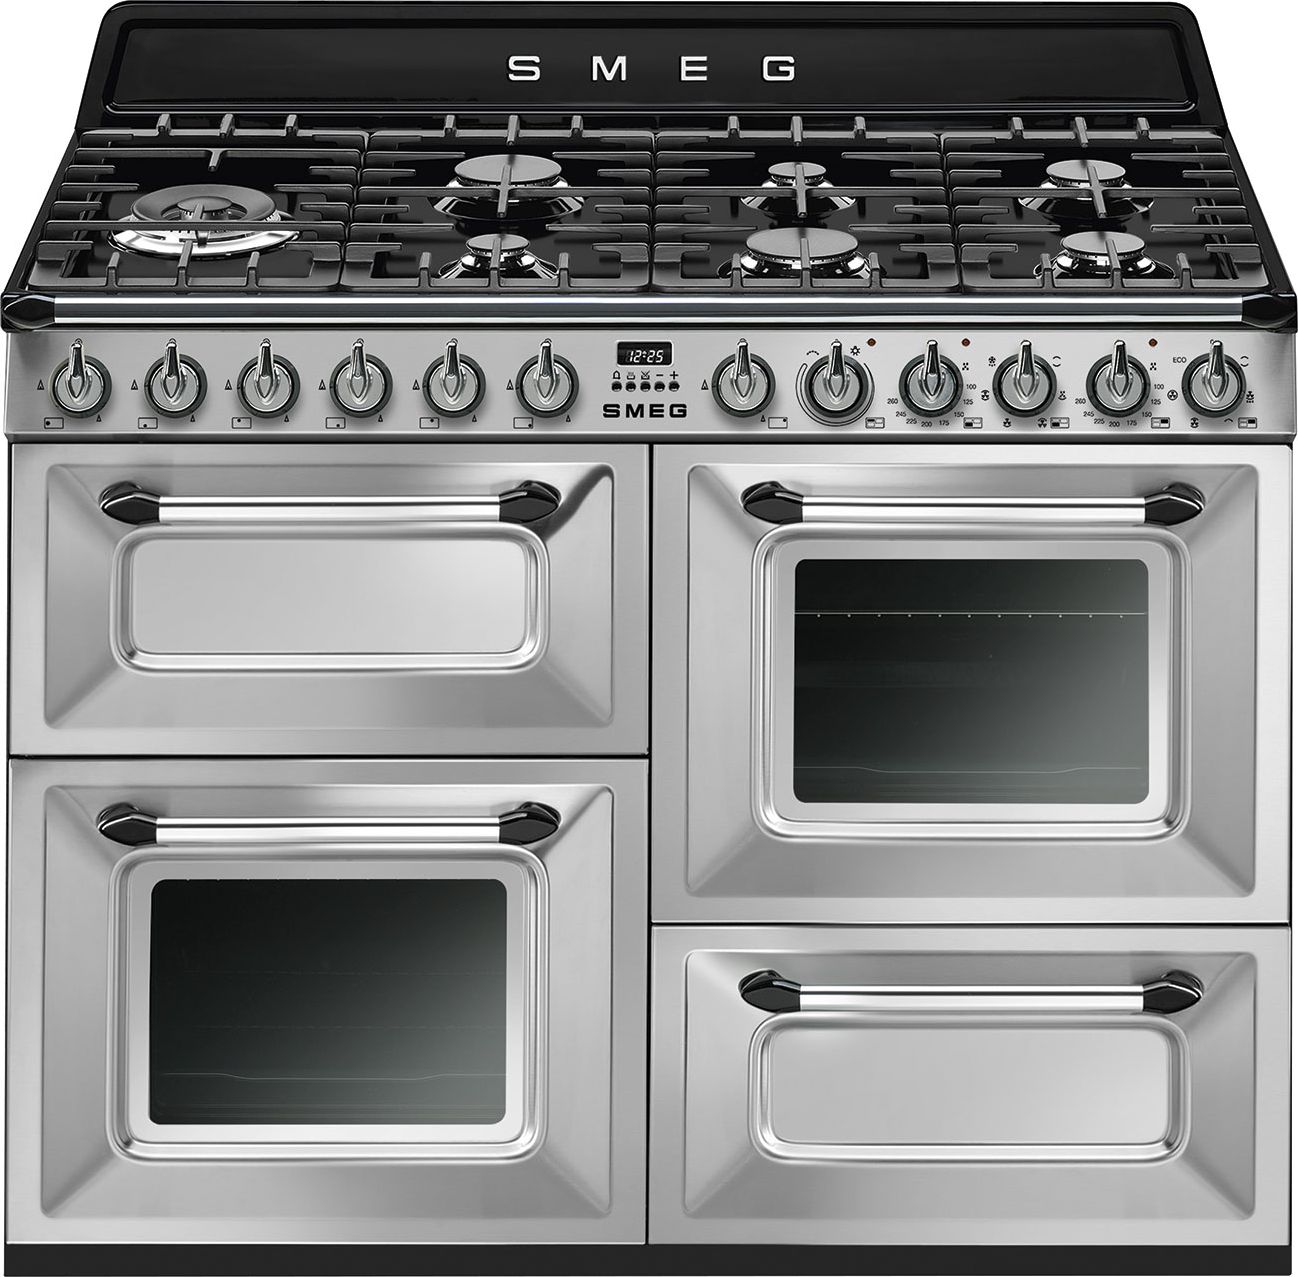 Smeg Victoria TR4110X-1 110cm Dual Fuel Range Cooker - Stainless Steel - A/A Rated, Stainless Steel